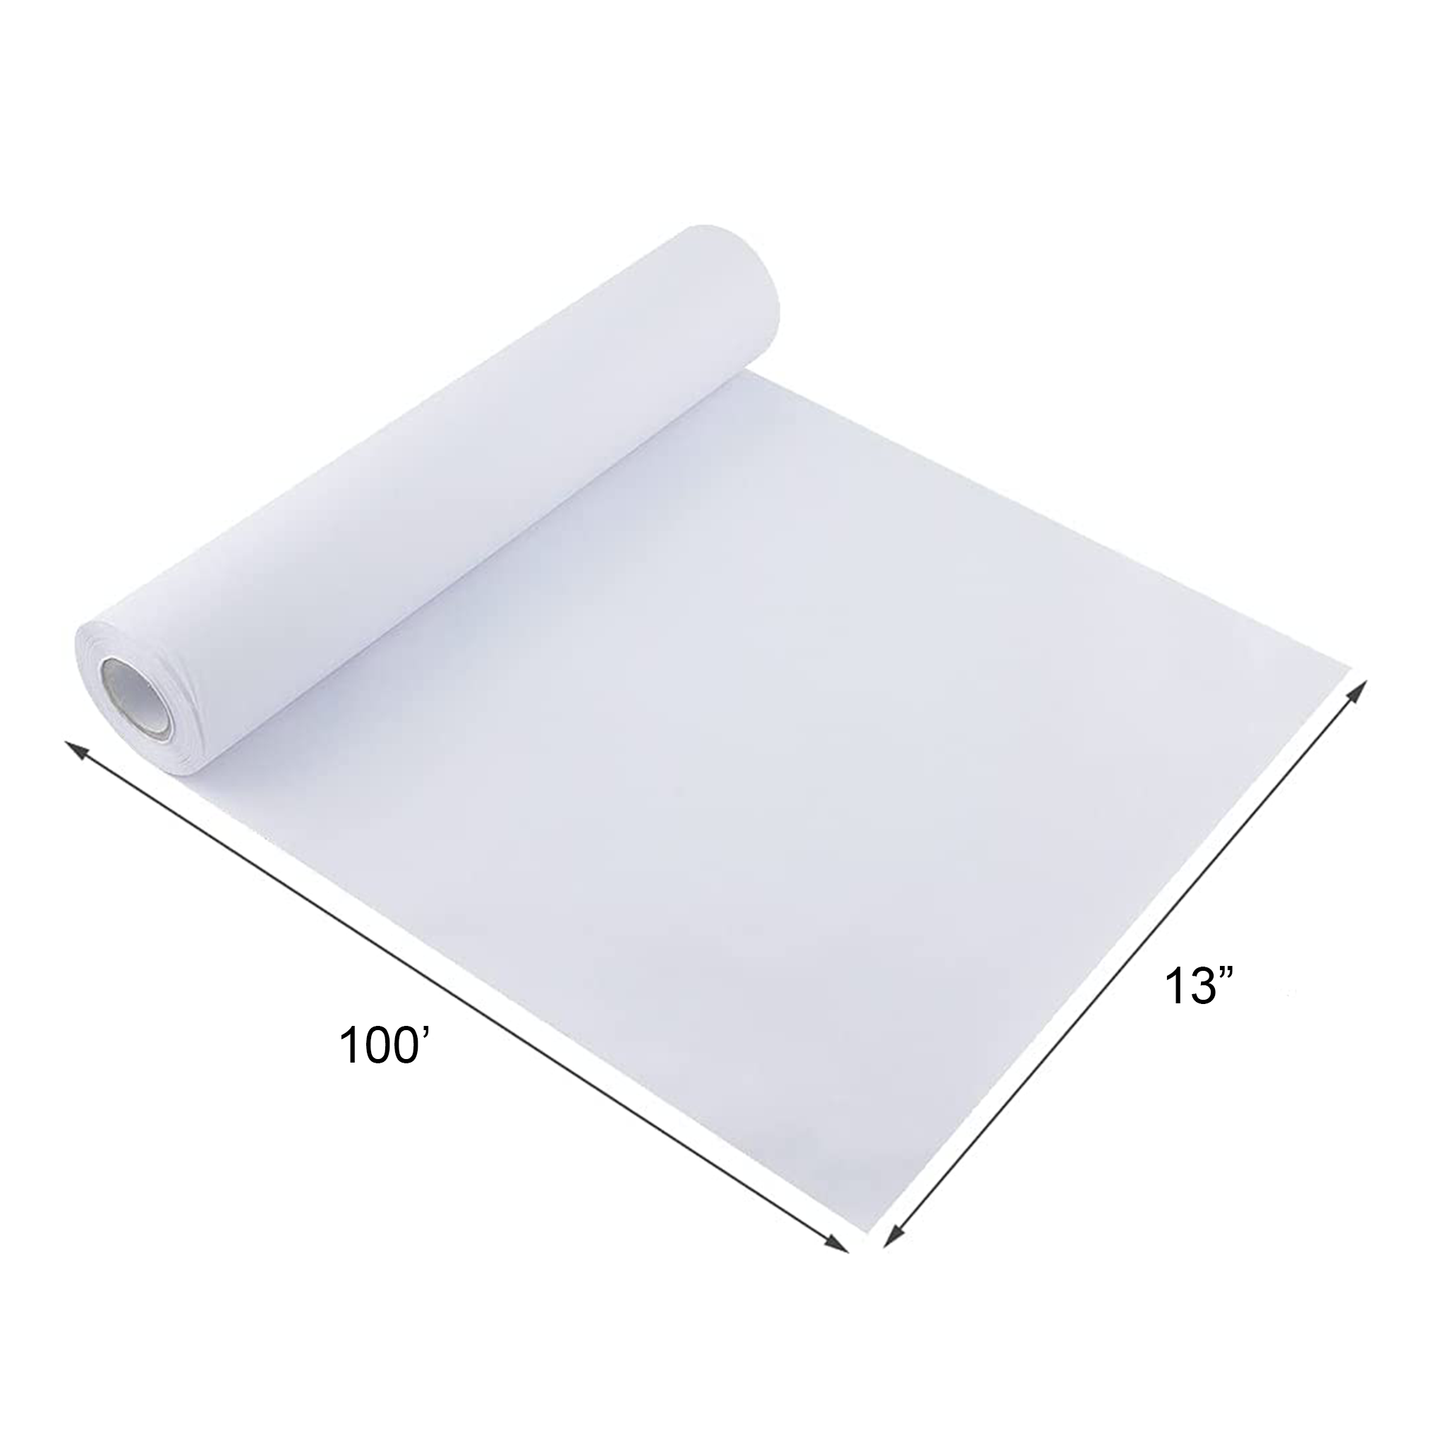 13" x 100' Archery Replacement Paper Roll from Papertuner.com